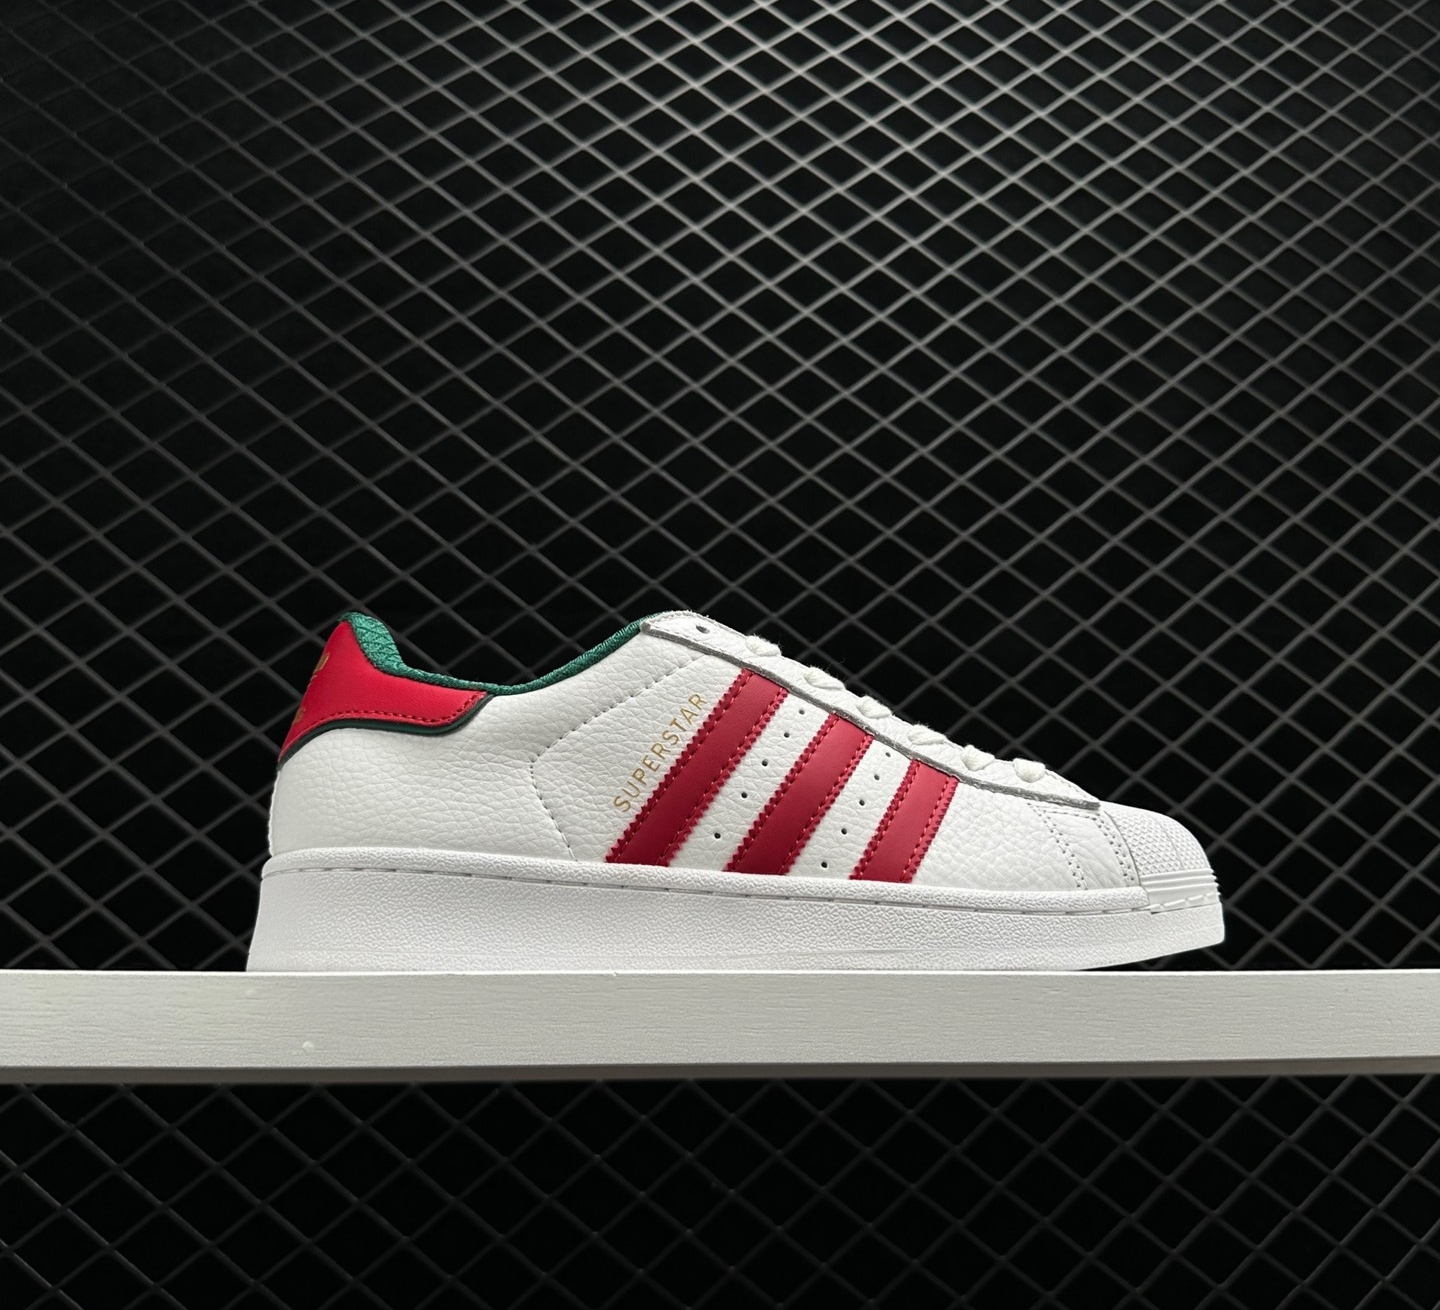 Adidas Superstar White Green Red D96974 - Classic Style with a Pop of Color